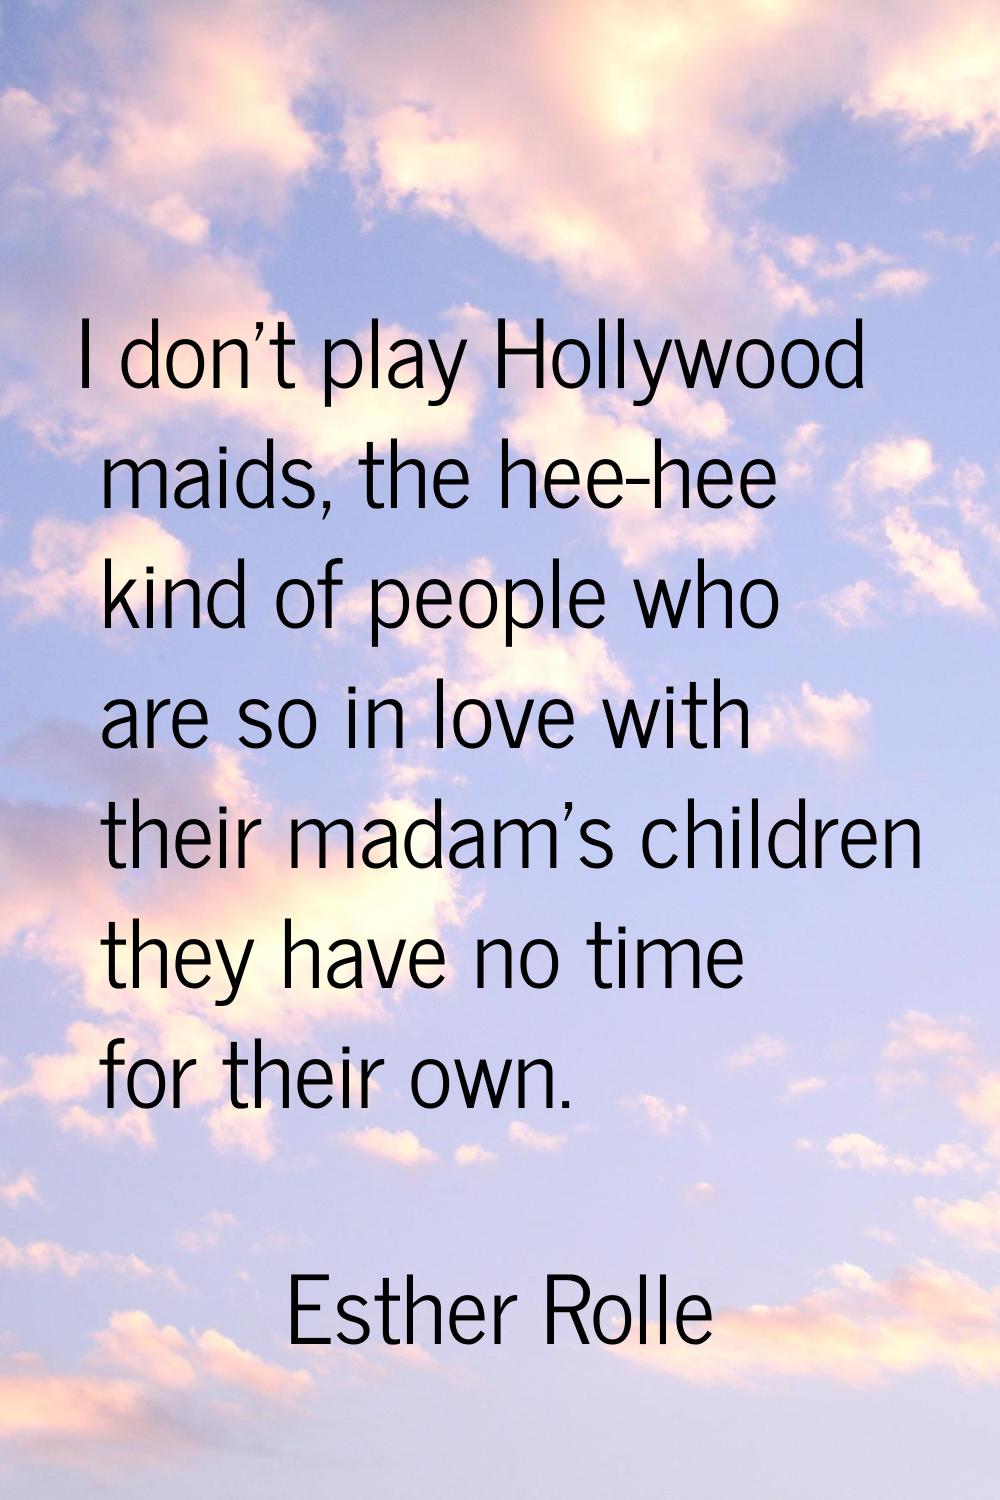 I don't play Hollywood maids, the hee-hee kind of people who are so in love with their madam's chil